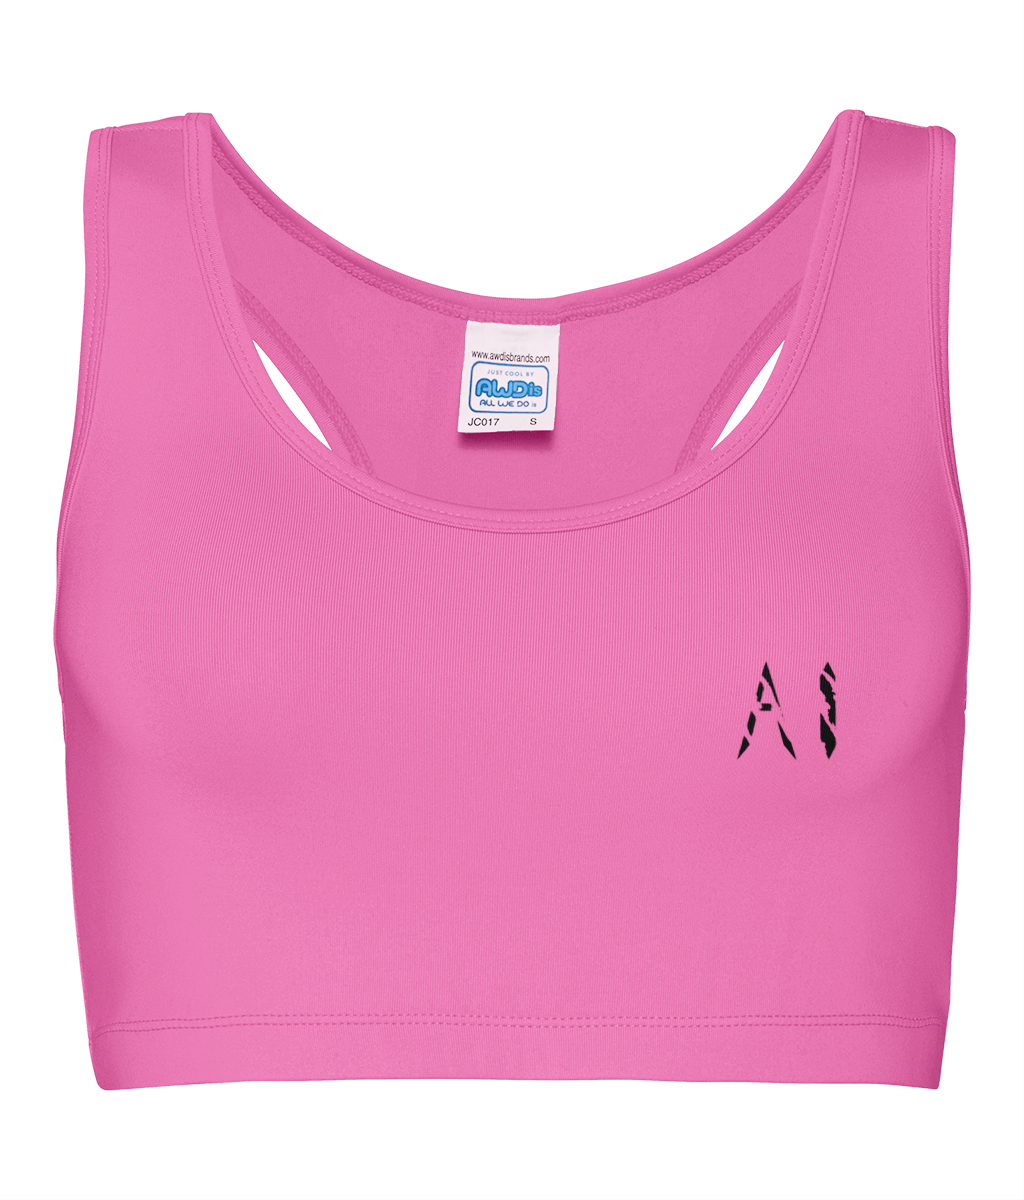 Womens Athletic Performance Cropped rose pink Top with black logo on left breast